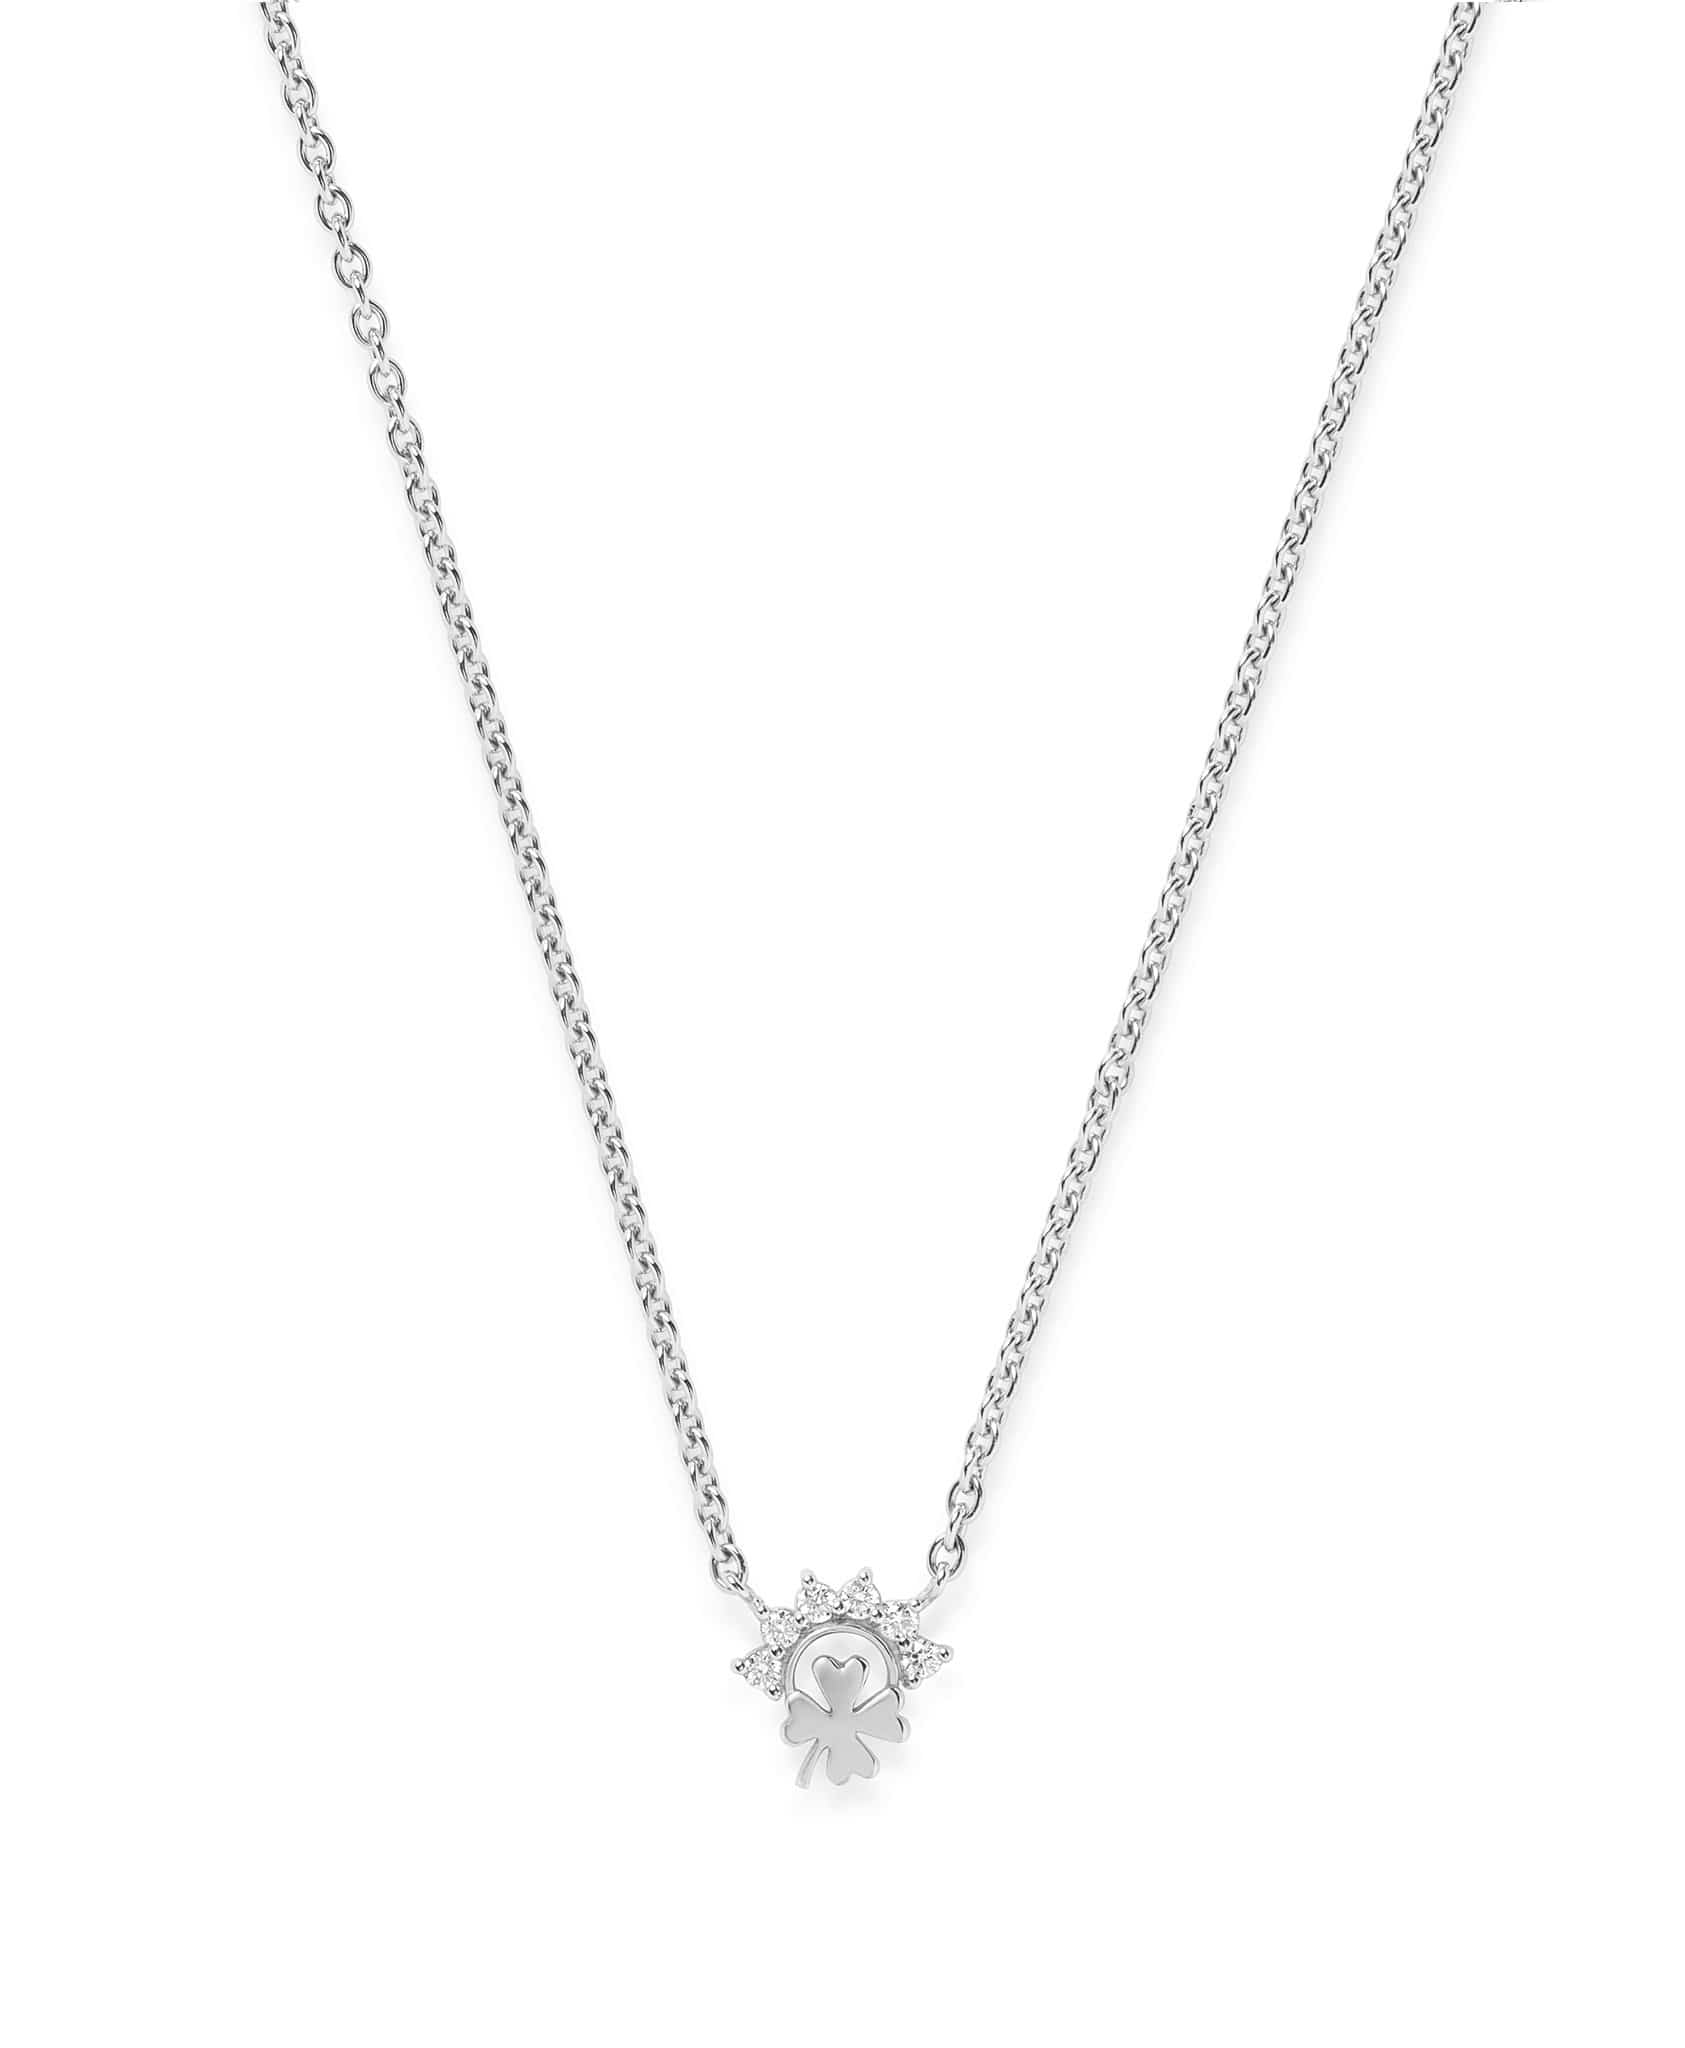 Small Luck Pendant: Discover Luxury Fine Jewelry | Nouvel Heritage || White Gold